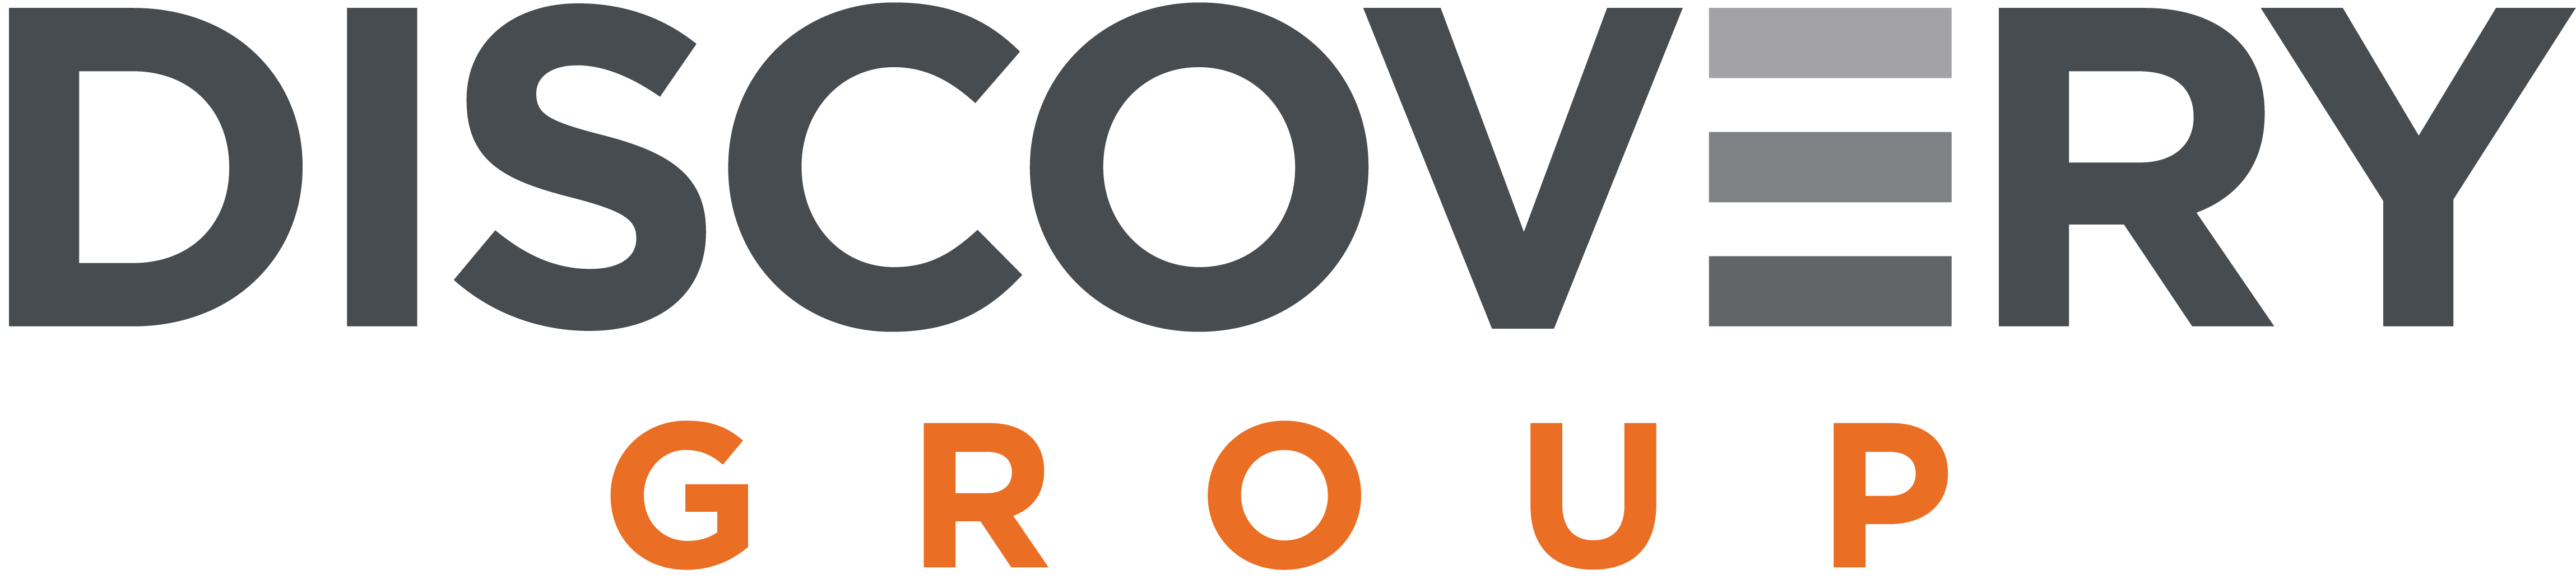 Discovery Group